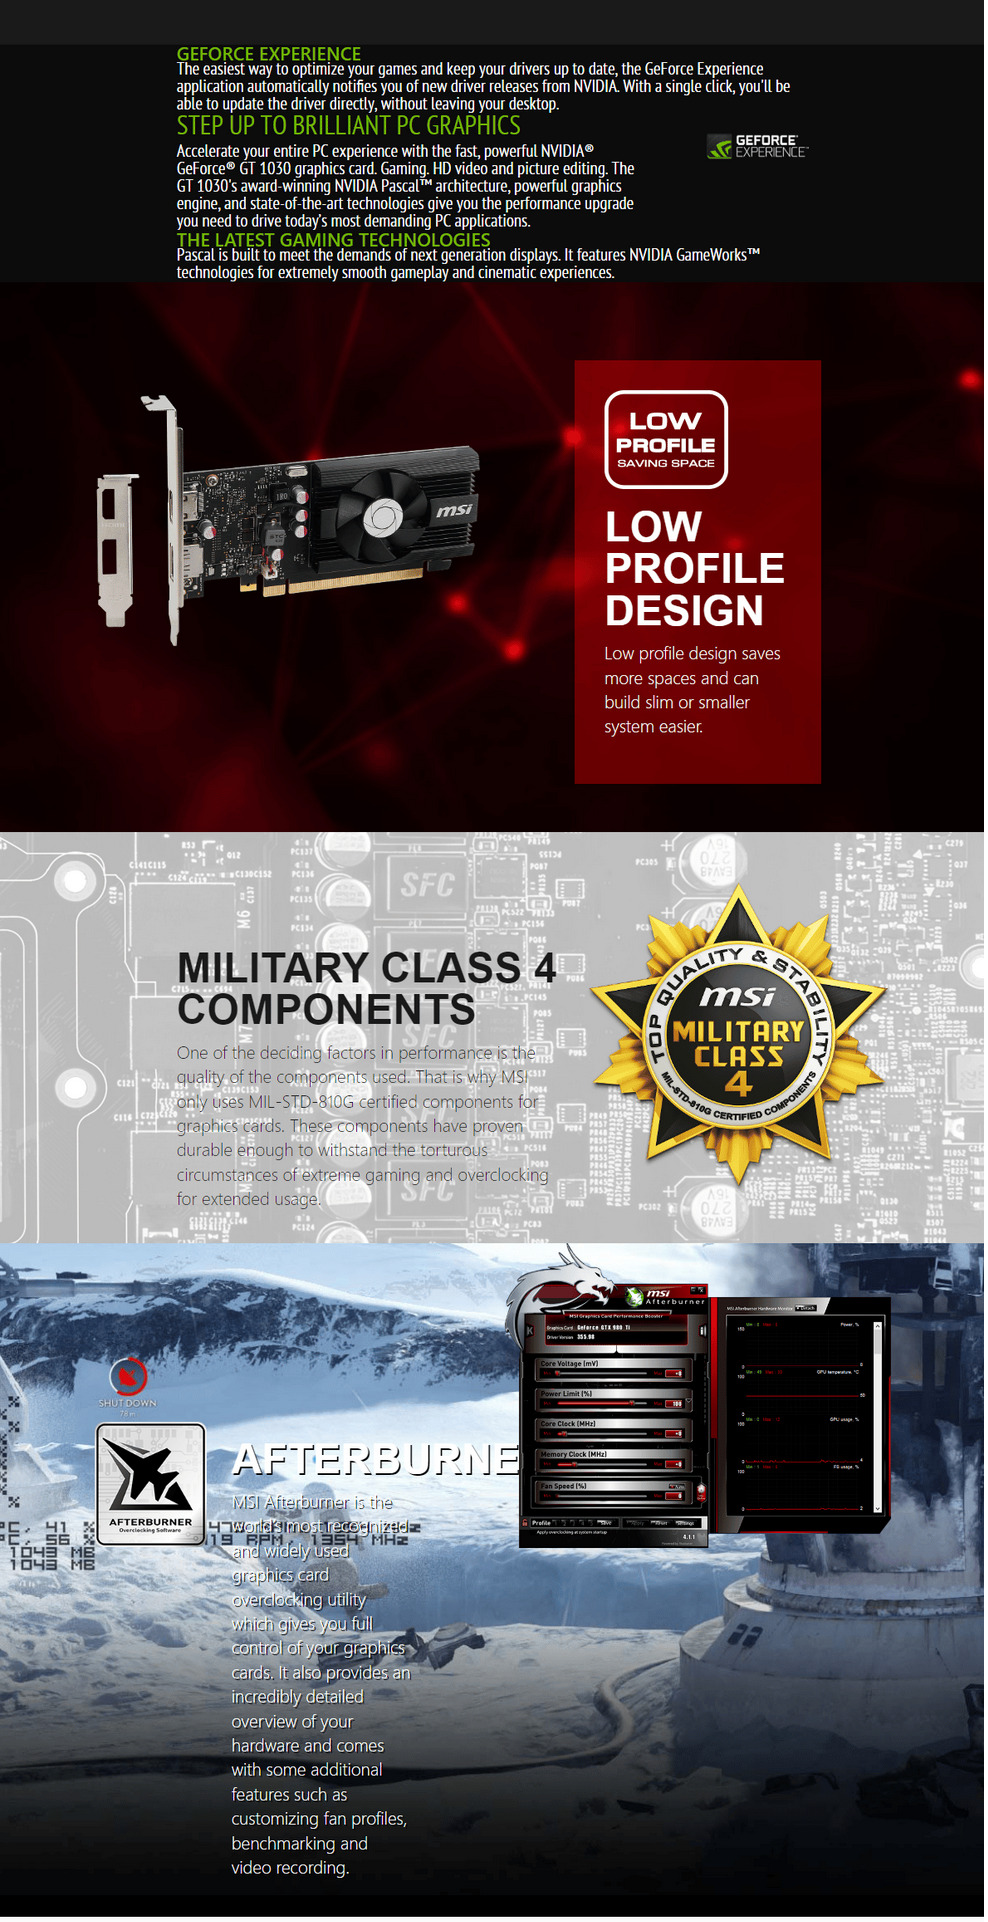 A large marketing image providing additional information about the product MSI GeForce GT 1030 4GB DDR4 - Additional alt info not provided